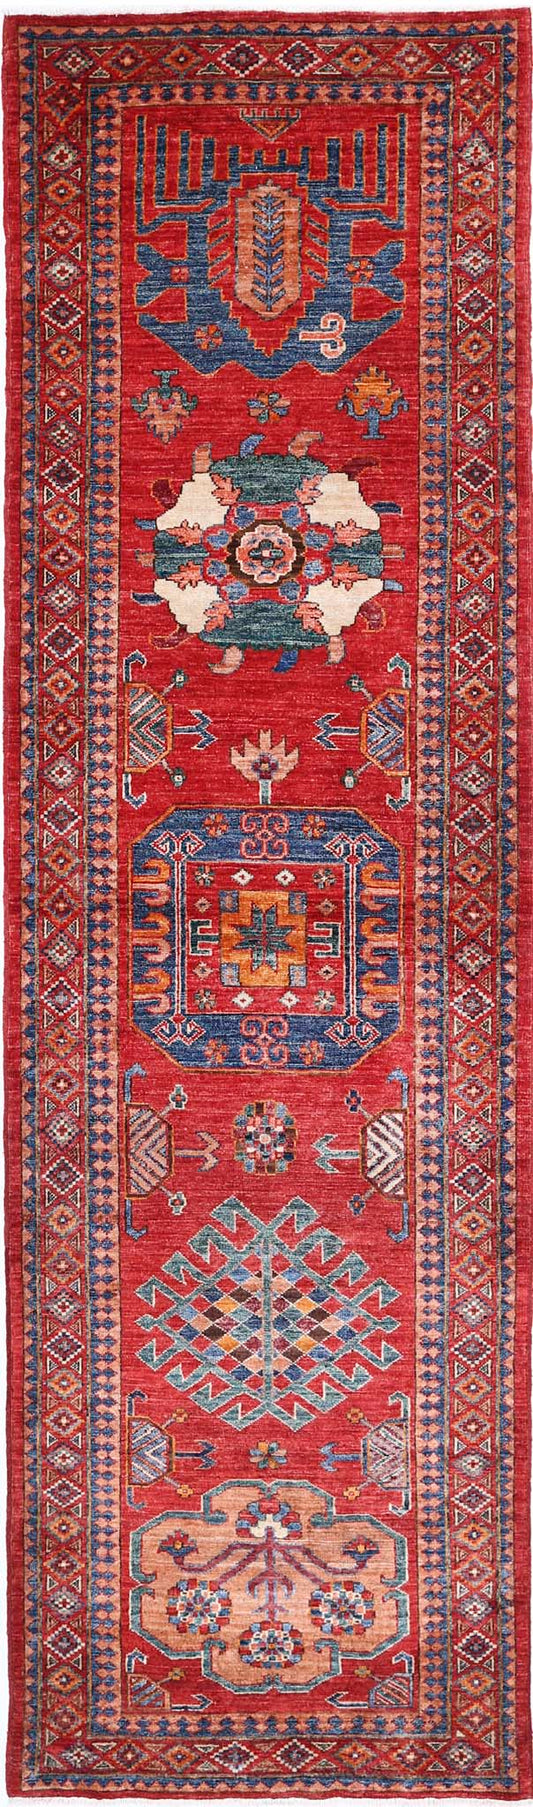 Tribal Hand Knotted Humna Humna Wool Rug of Size 2'7'' X 9'7'' in Red and Taupe Colors - Made in Afghanistan